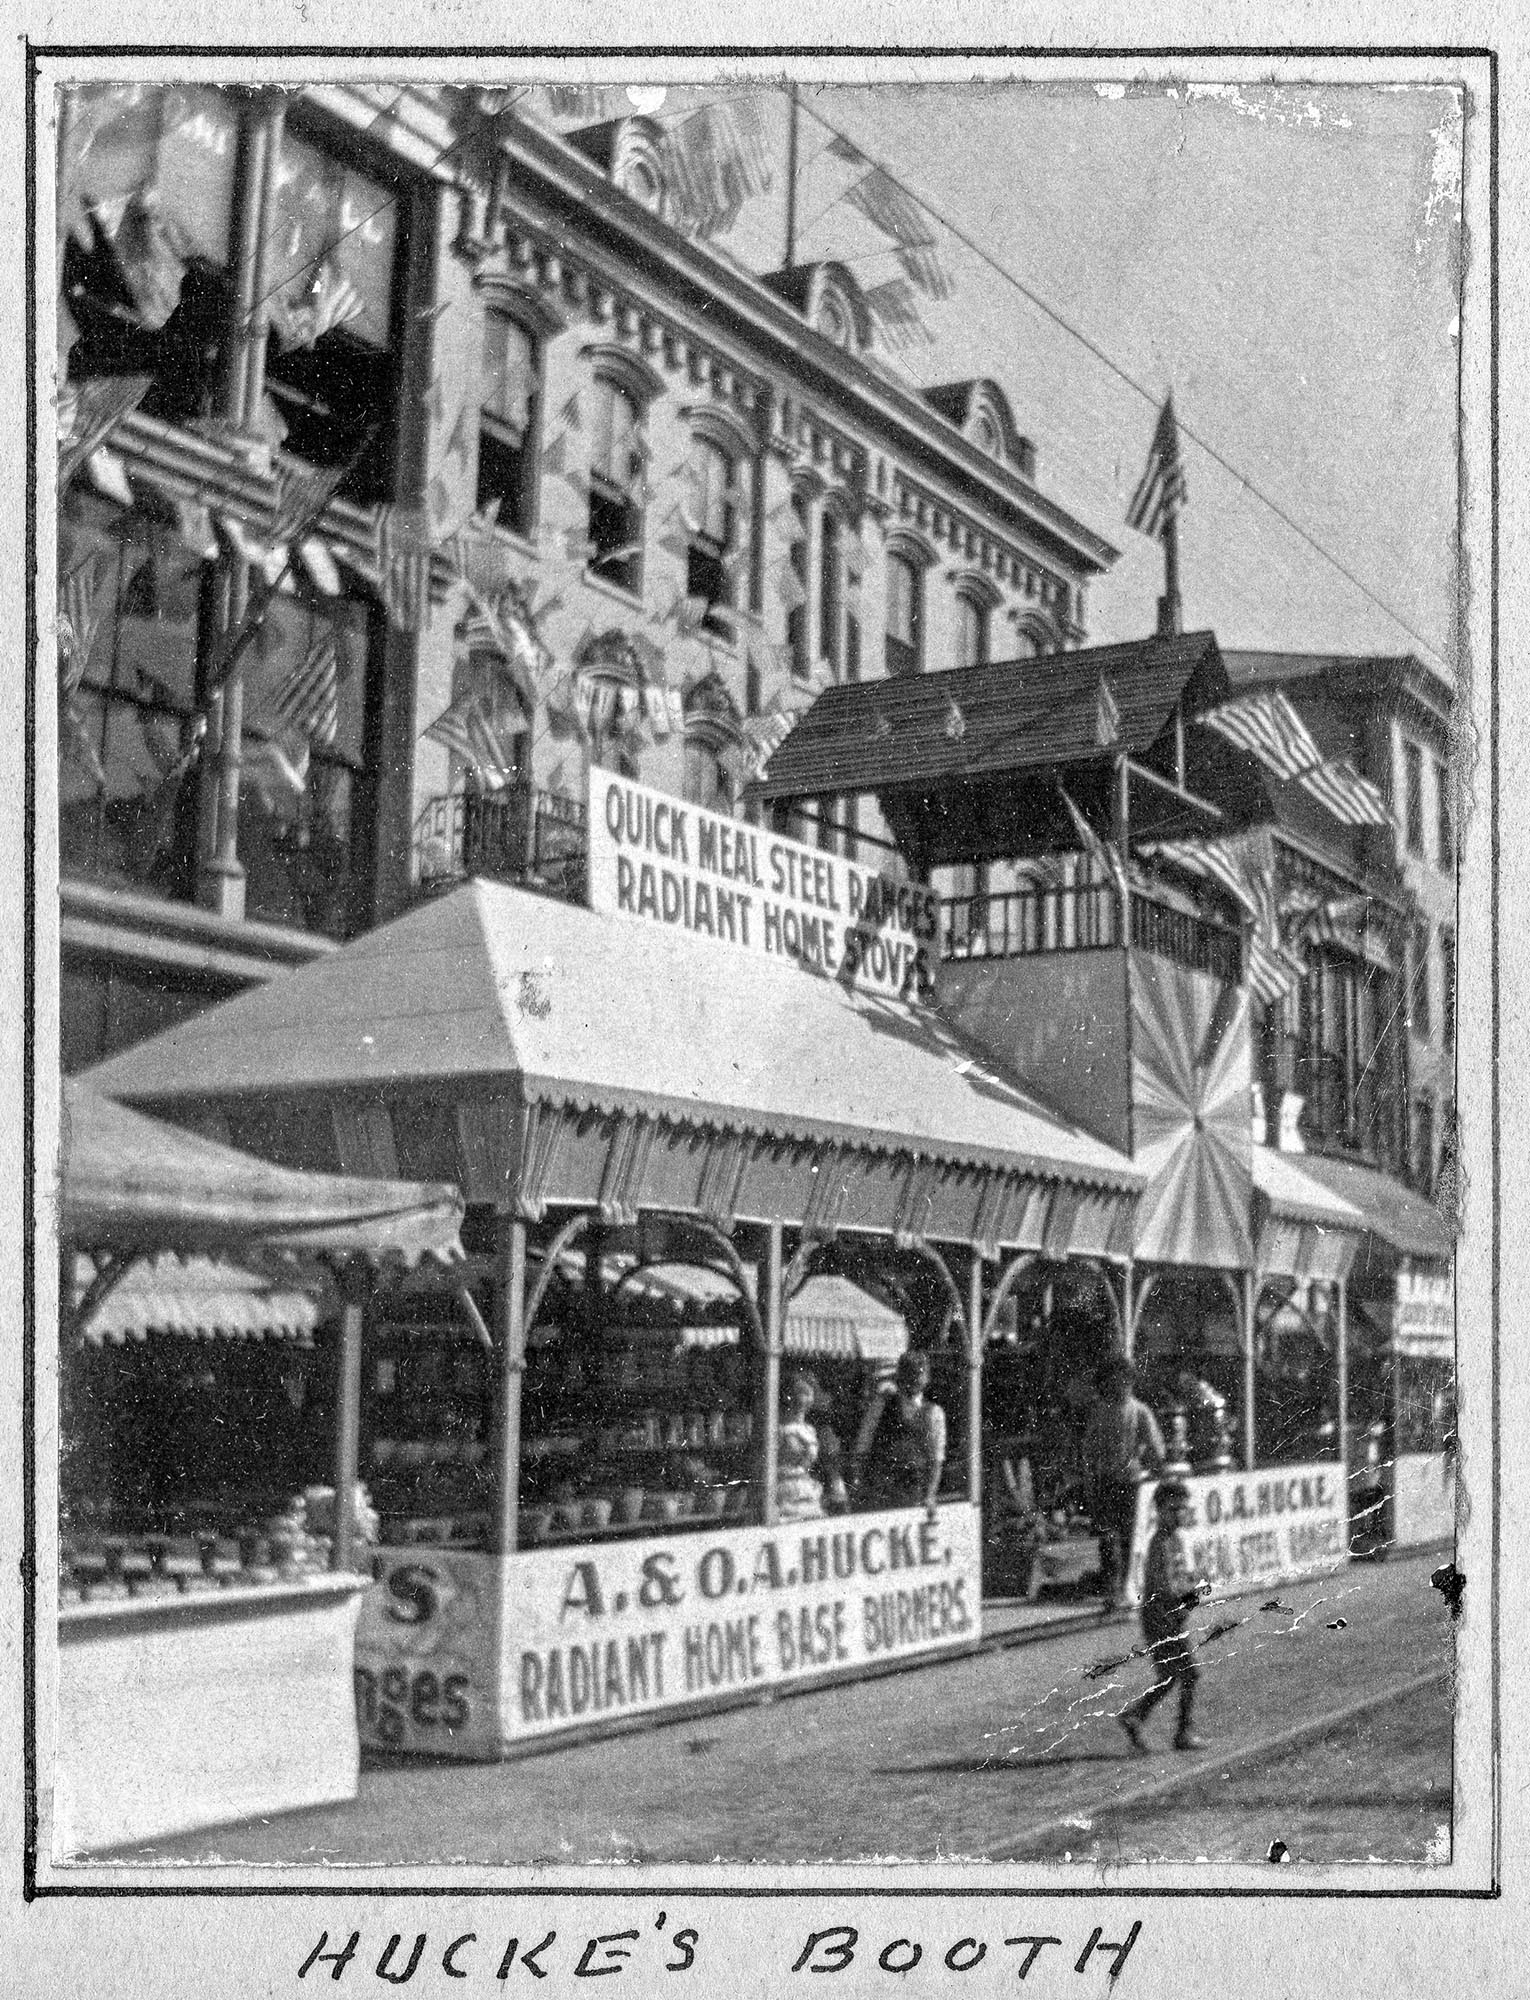 The 1901 town fair in Belleville, Illinois. Featuring "Albert & O. Hucke, Radiant Home Base Burners and Stoves, Quick Meal Steel Ranges." Huckes was located at 17 and 19 East Main Street.

Photo taken by Samuel Peake Hyde, b. Feb 17, 1850, St. Francisville, Clark, Missouri; d. April 28, 1921, Belleville, St. Clair, Illinois., son of Edwin C. Hyde and Elizabeth Hyde. Samuel was a clerk for J. G. Green Company, 1867, and then worked with his father at E.C. Hyde & Co., Storage and Commission, 4 South Commercial Street. Sam resided at 37 North Douglas, Belleville.
